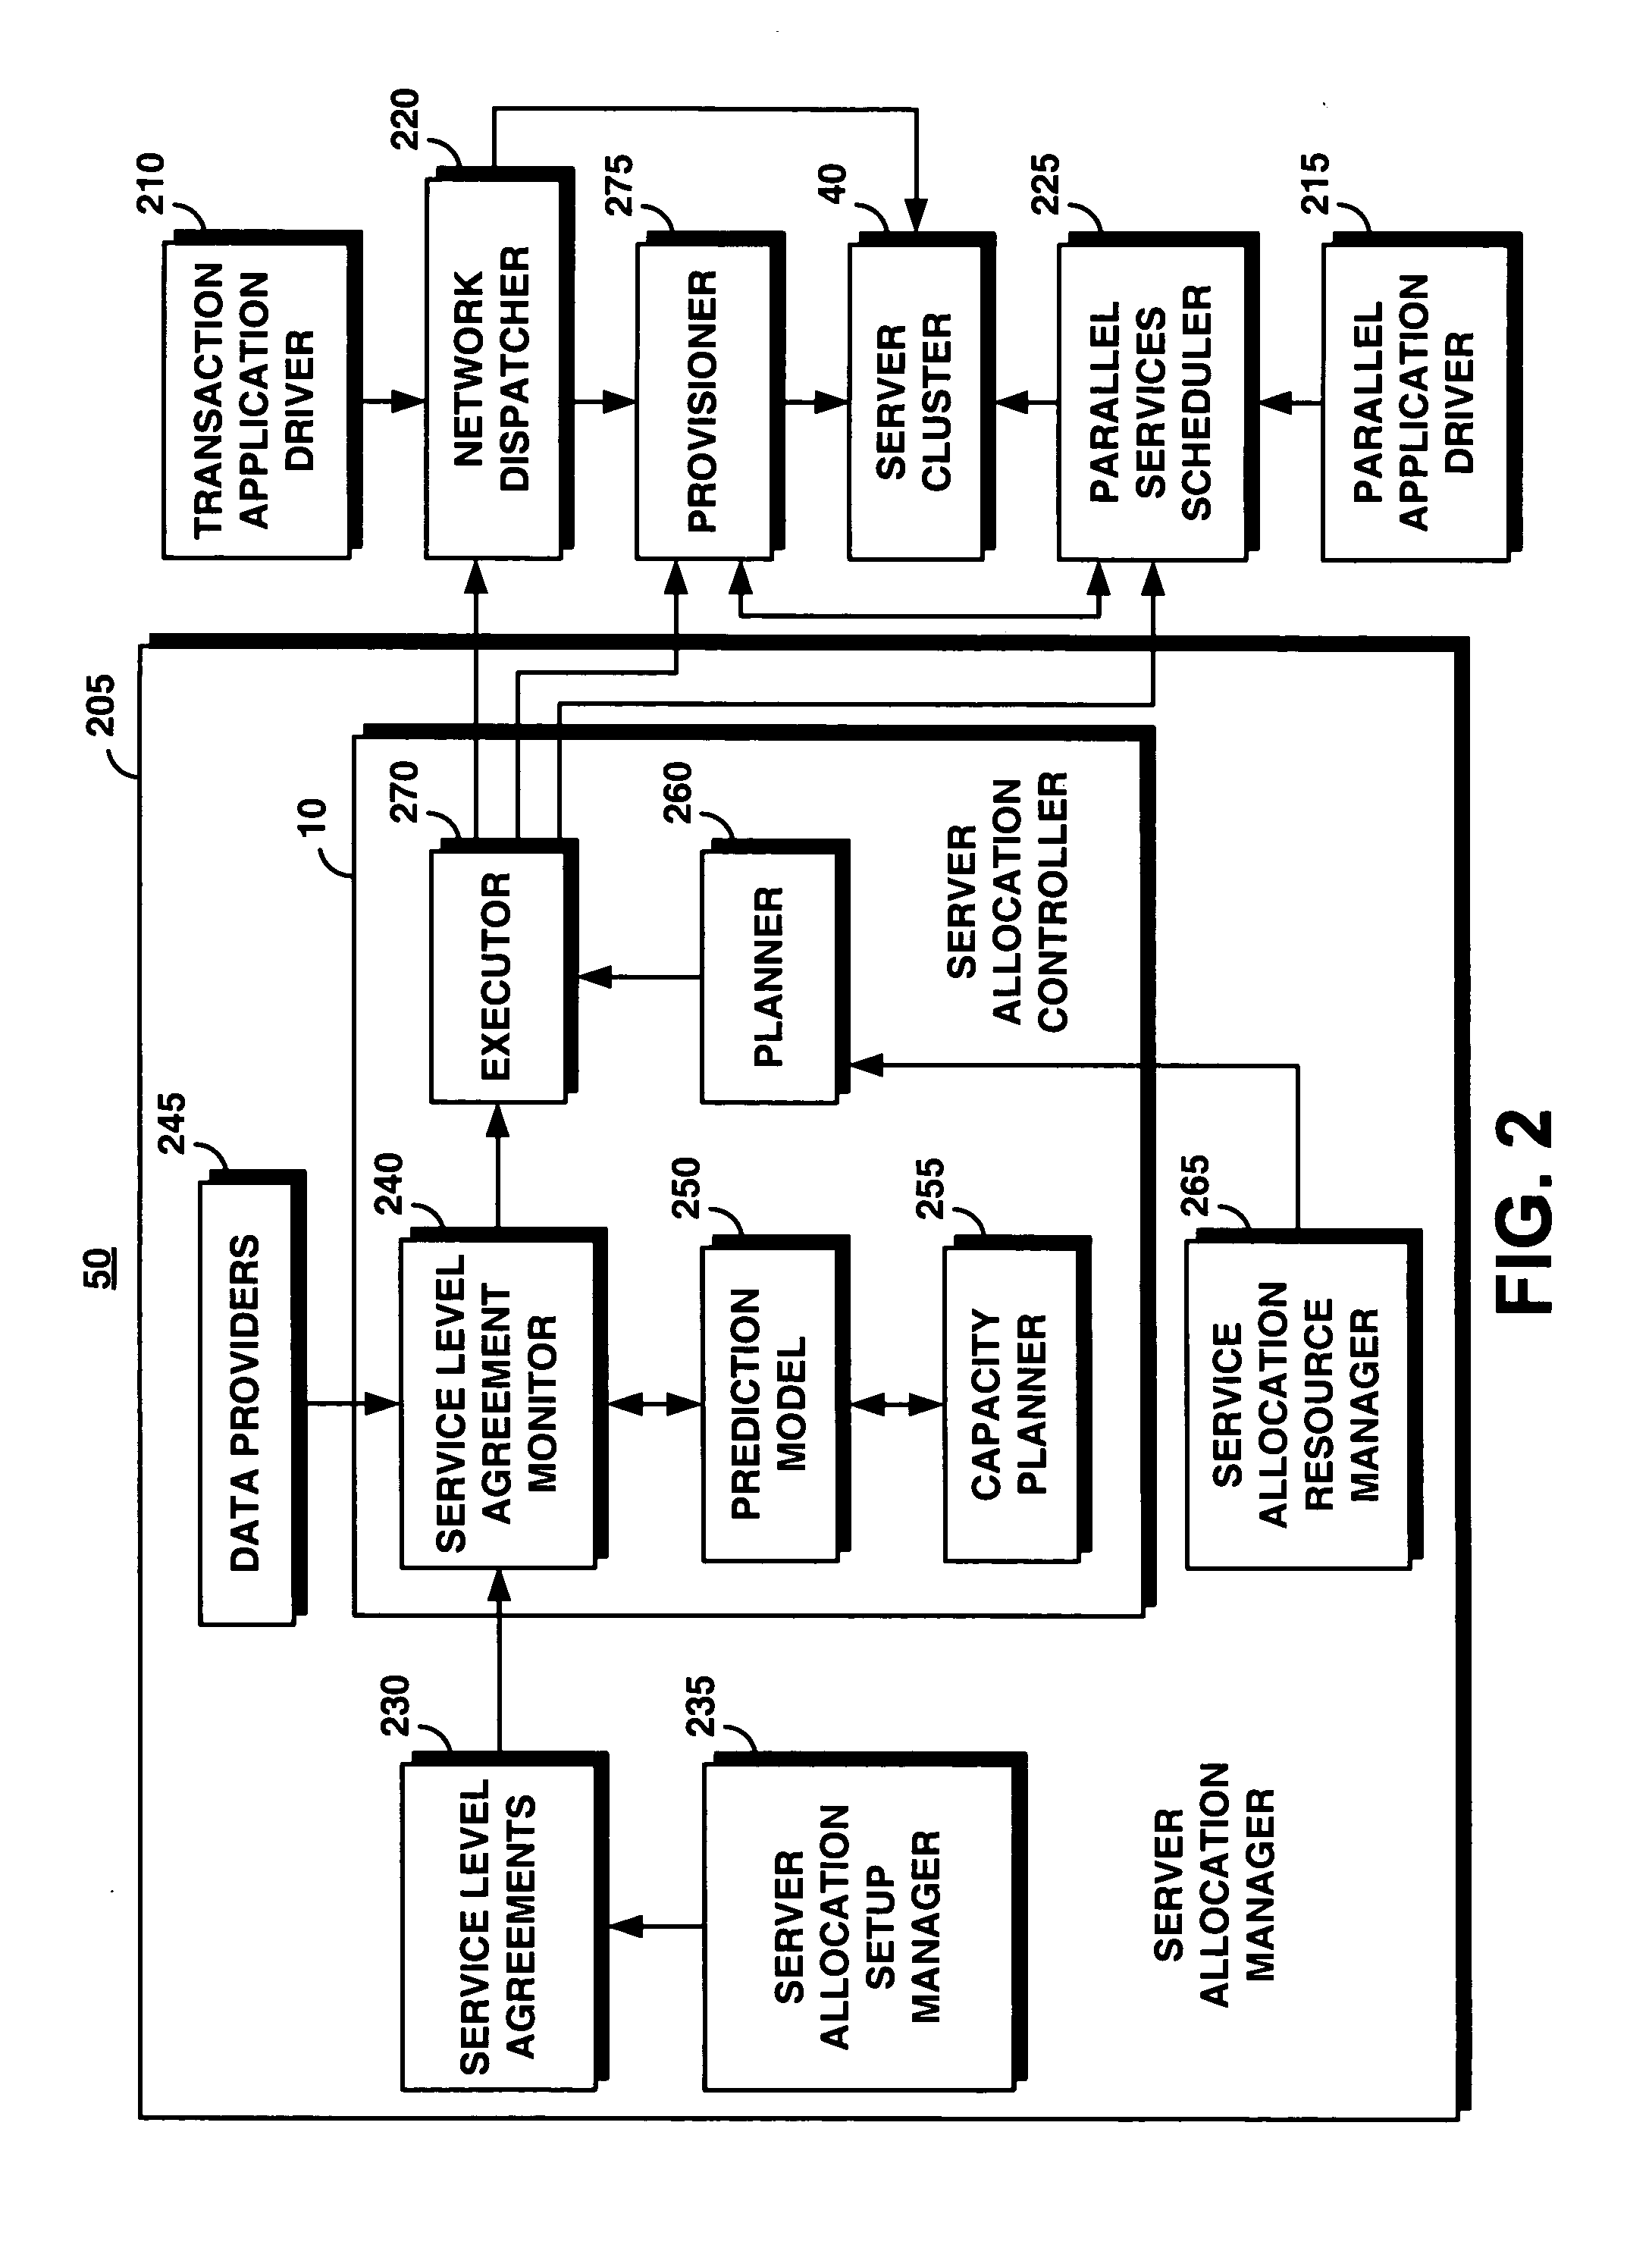 System and method for supporting transaction and parallel services in a clustered system based on a service level agreement